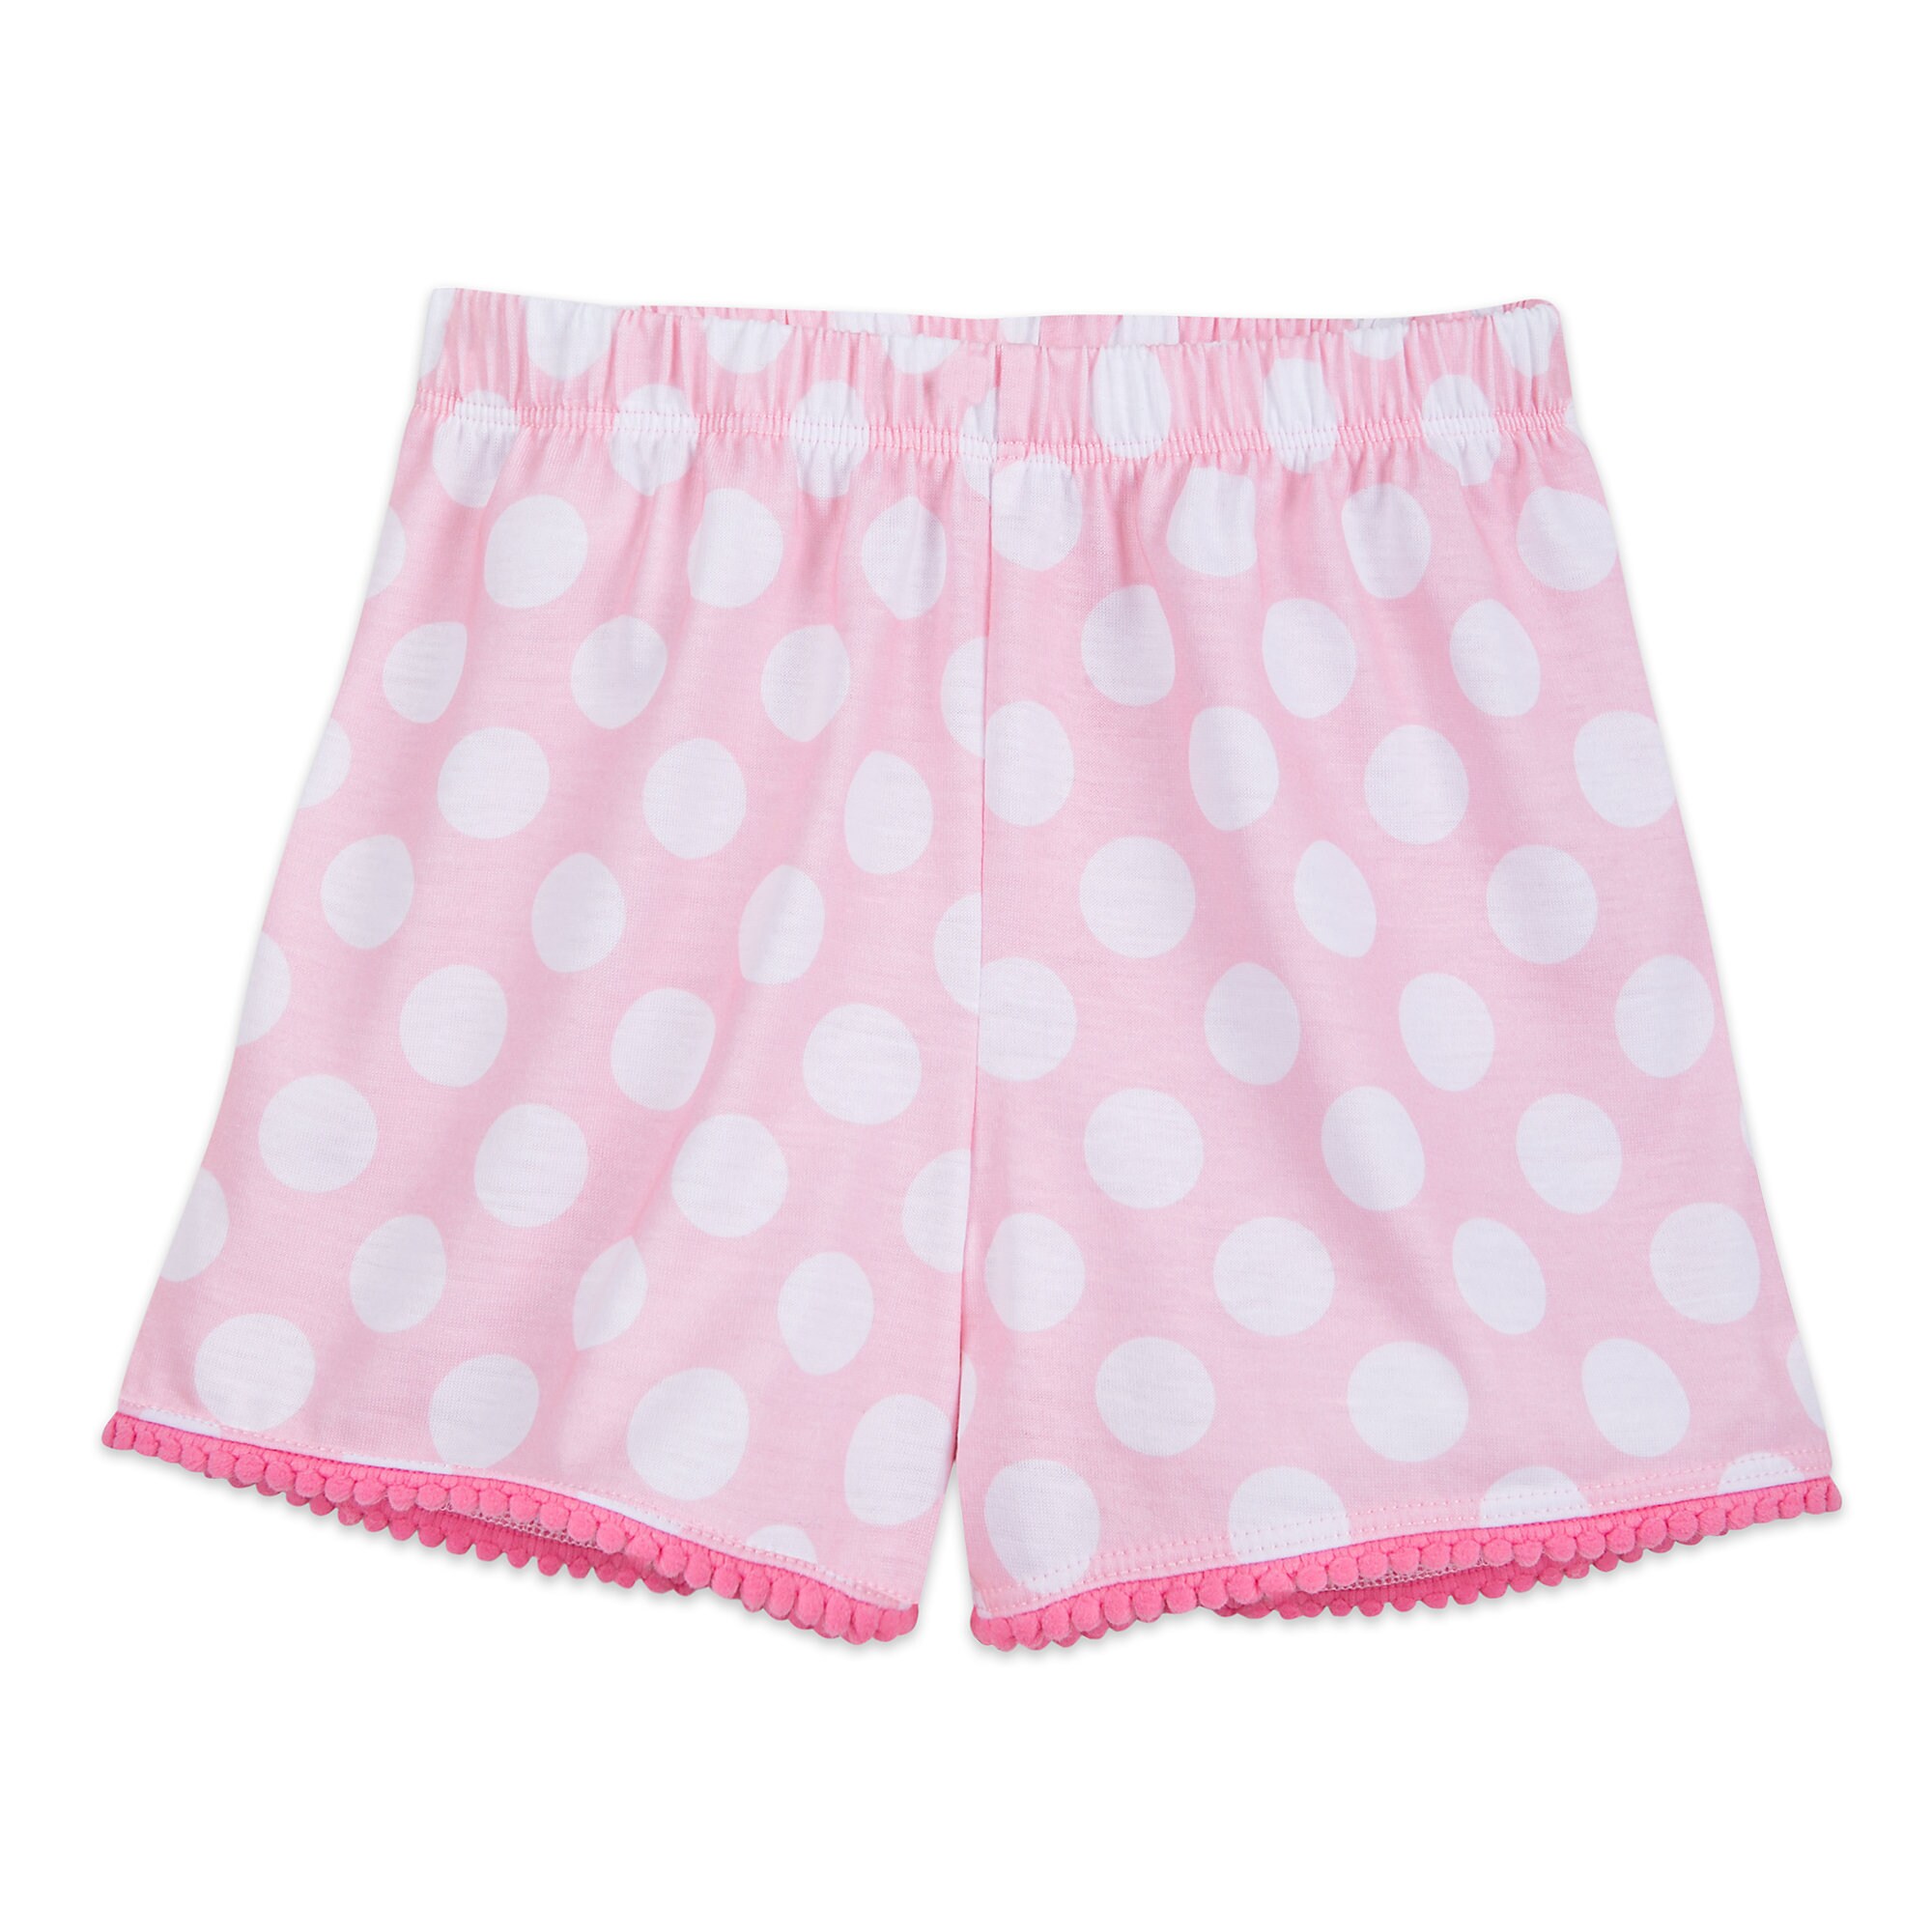 Minnie Mouse Pink Short Sleep Set for Girls